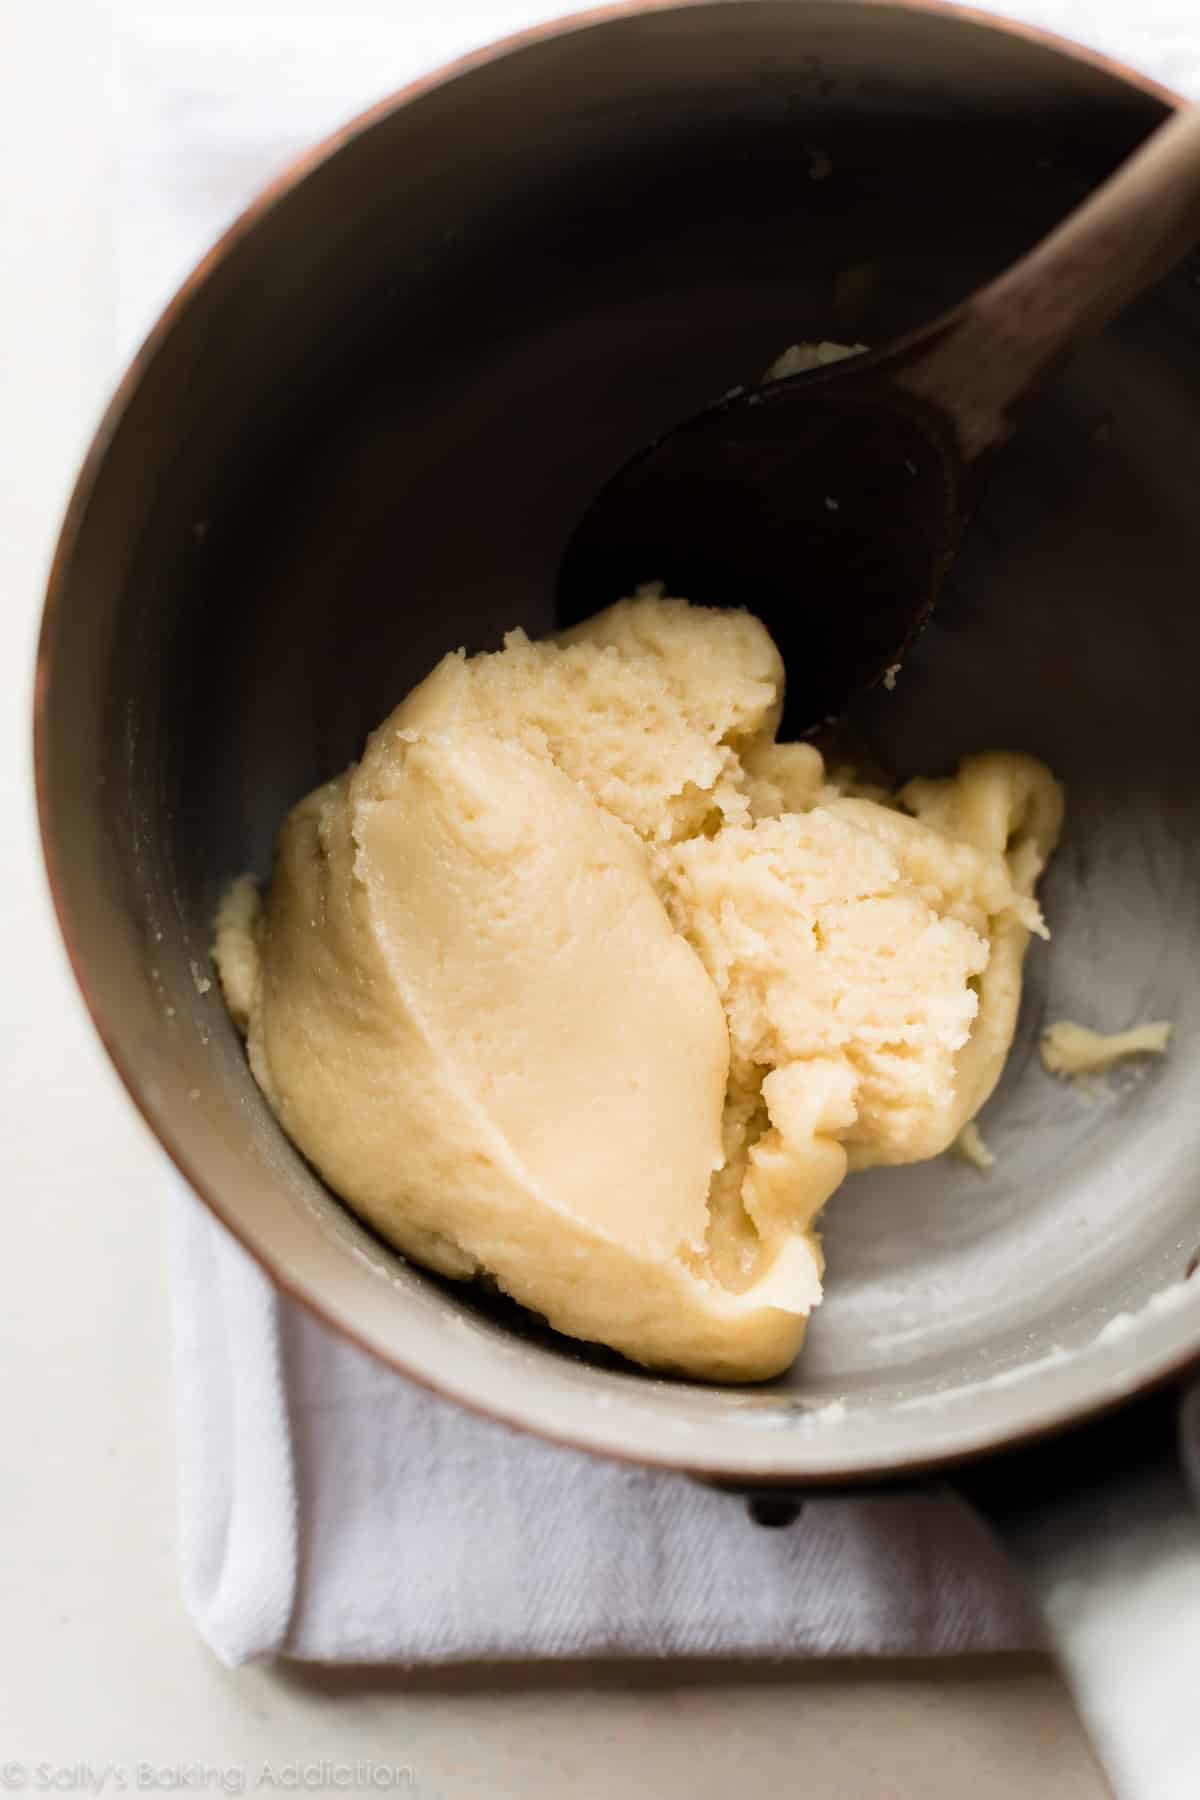 choux pastry dough in a saucepan